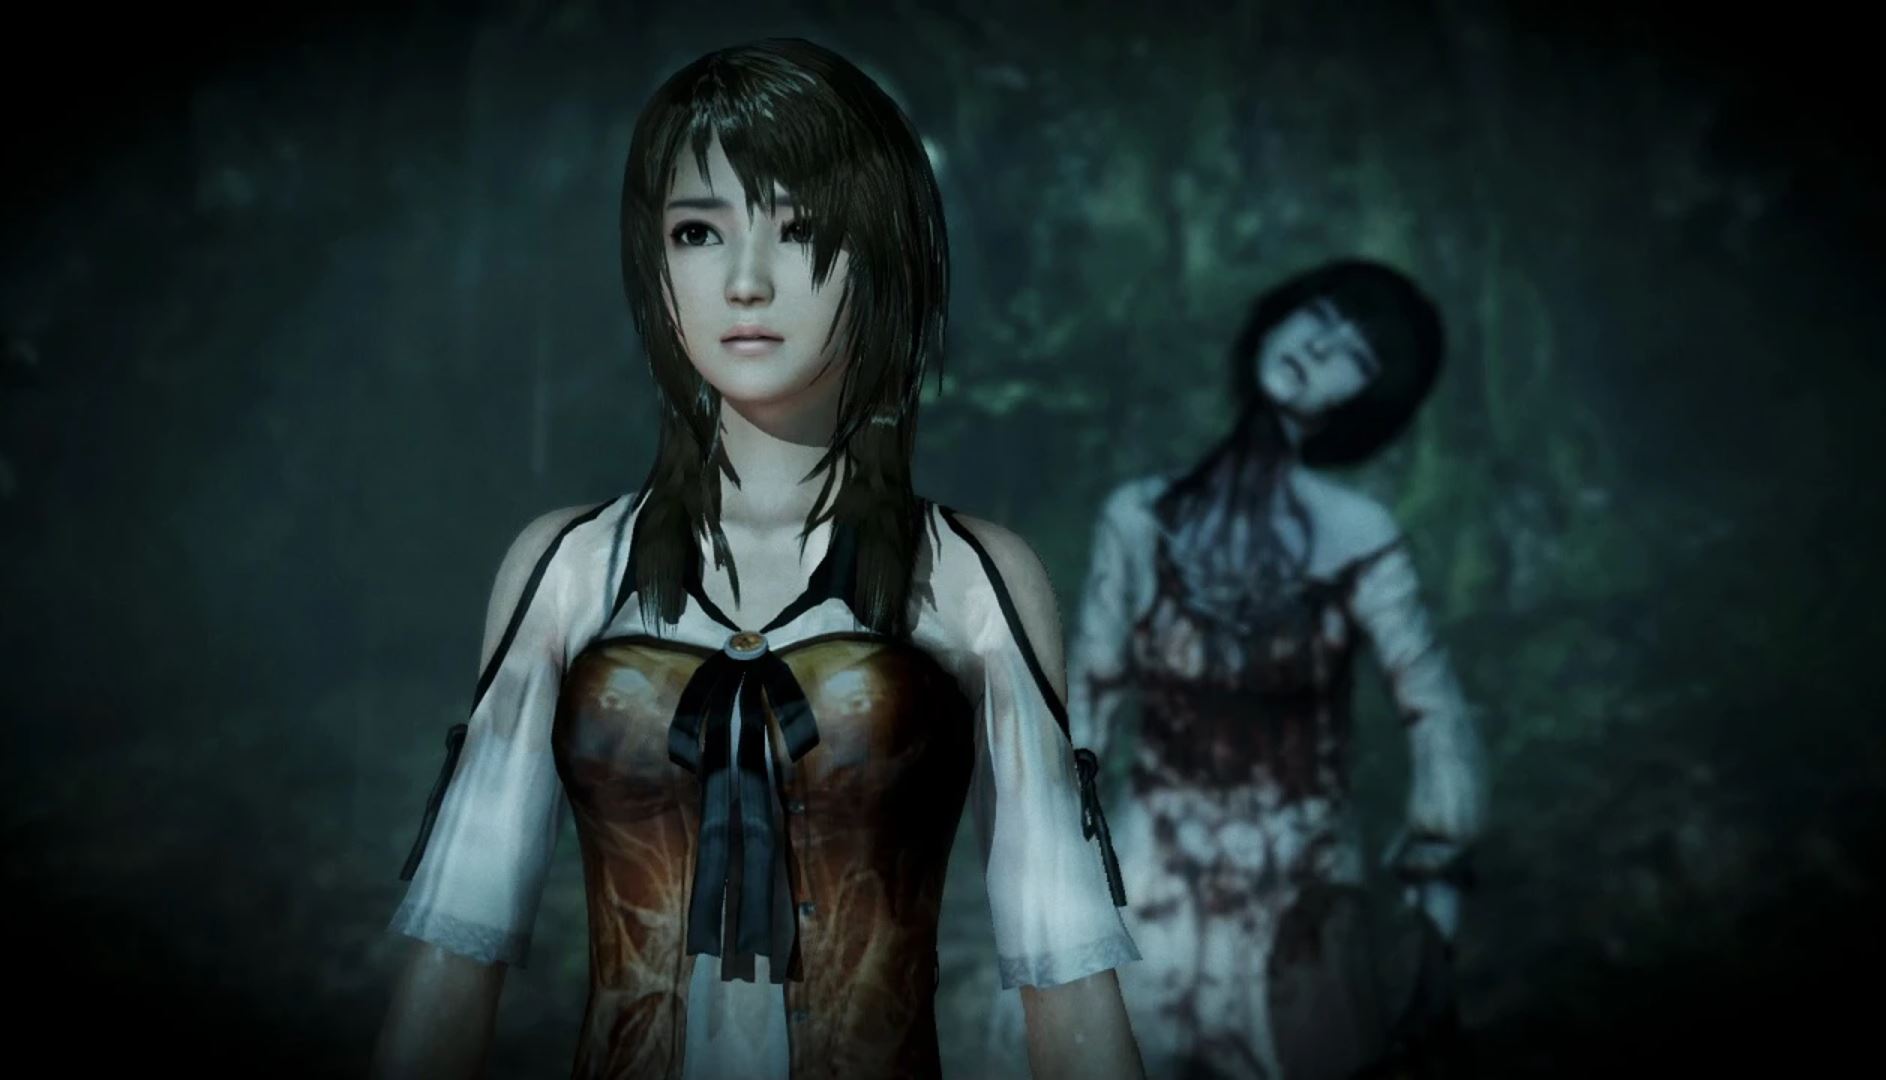  Fatal Frame: Maiden of Black Water escapes Wii U exclusivity to hit PC 